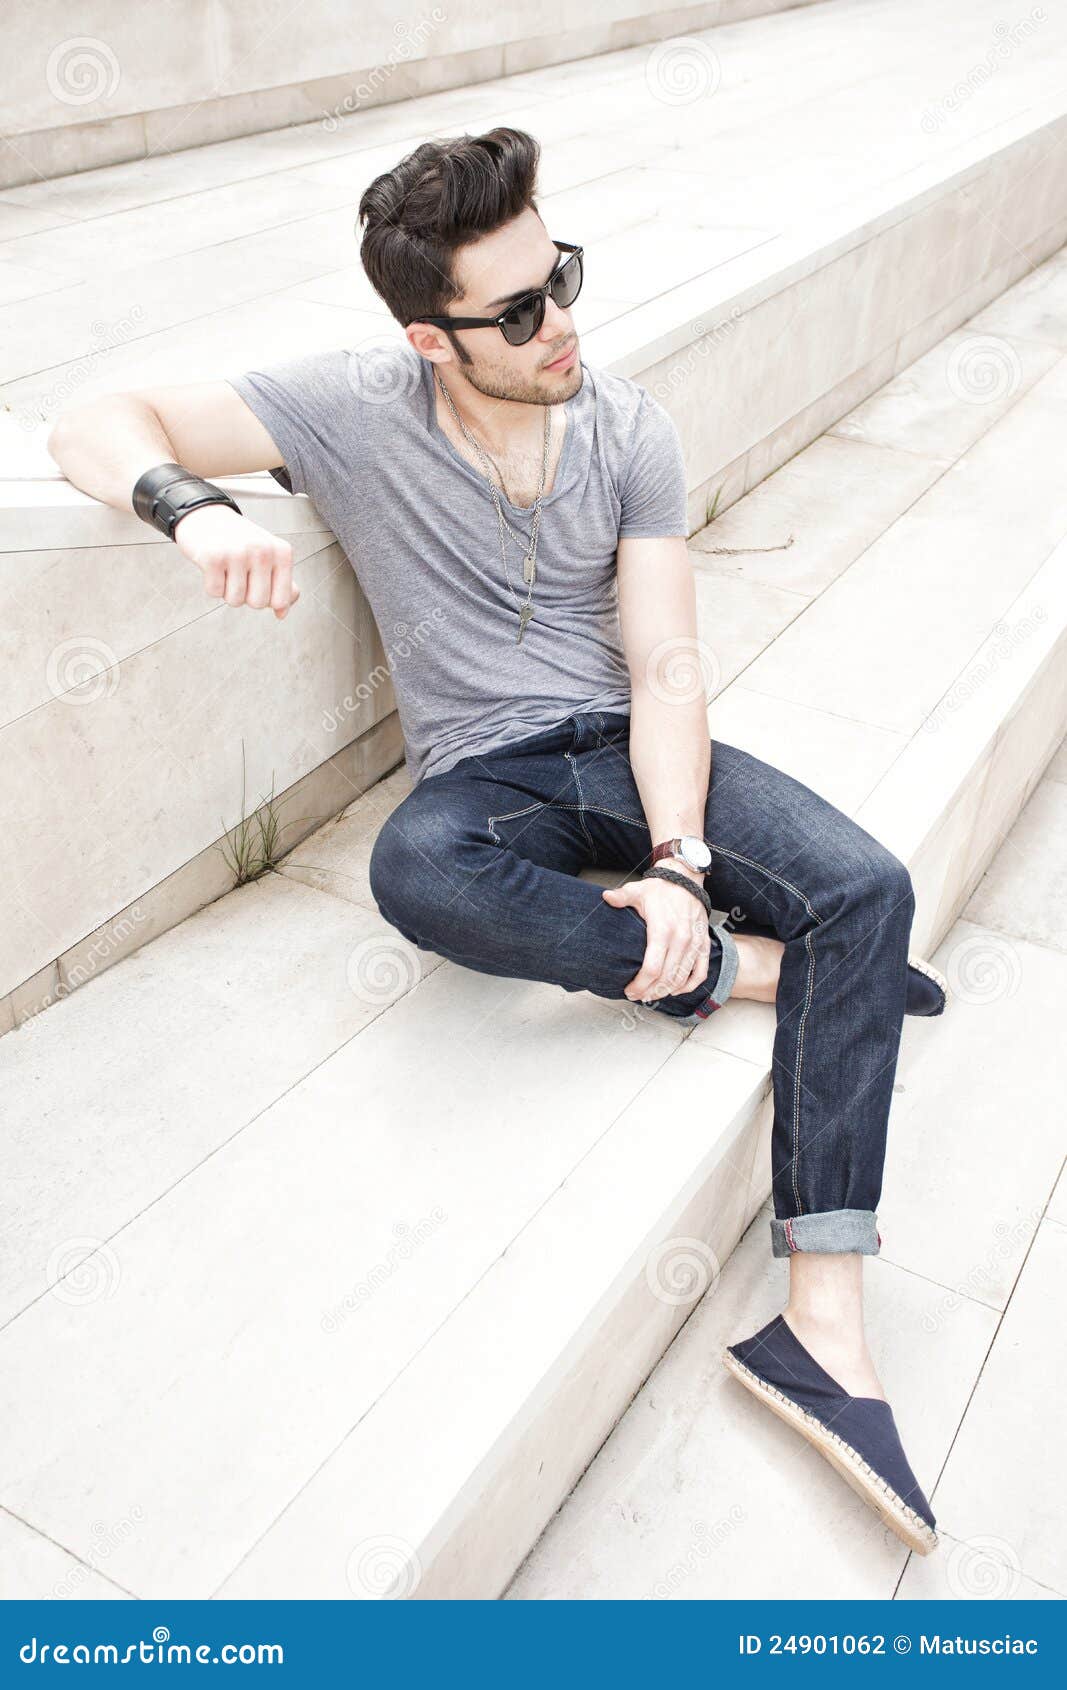 Men's urban style poses for photography | Men photoshoot, Mens fashion  urban, Mens photoshoot poses